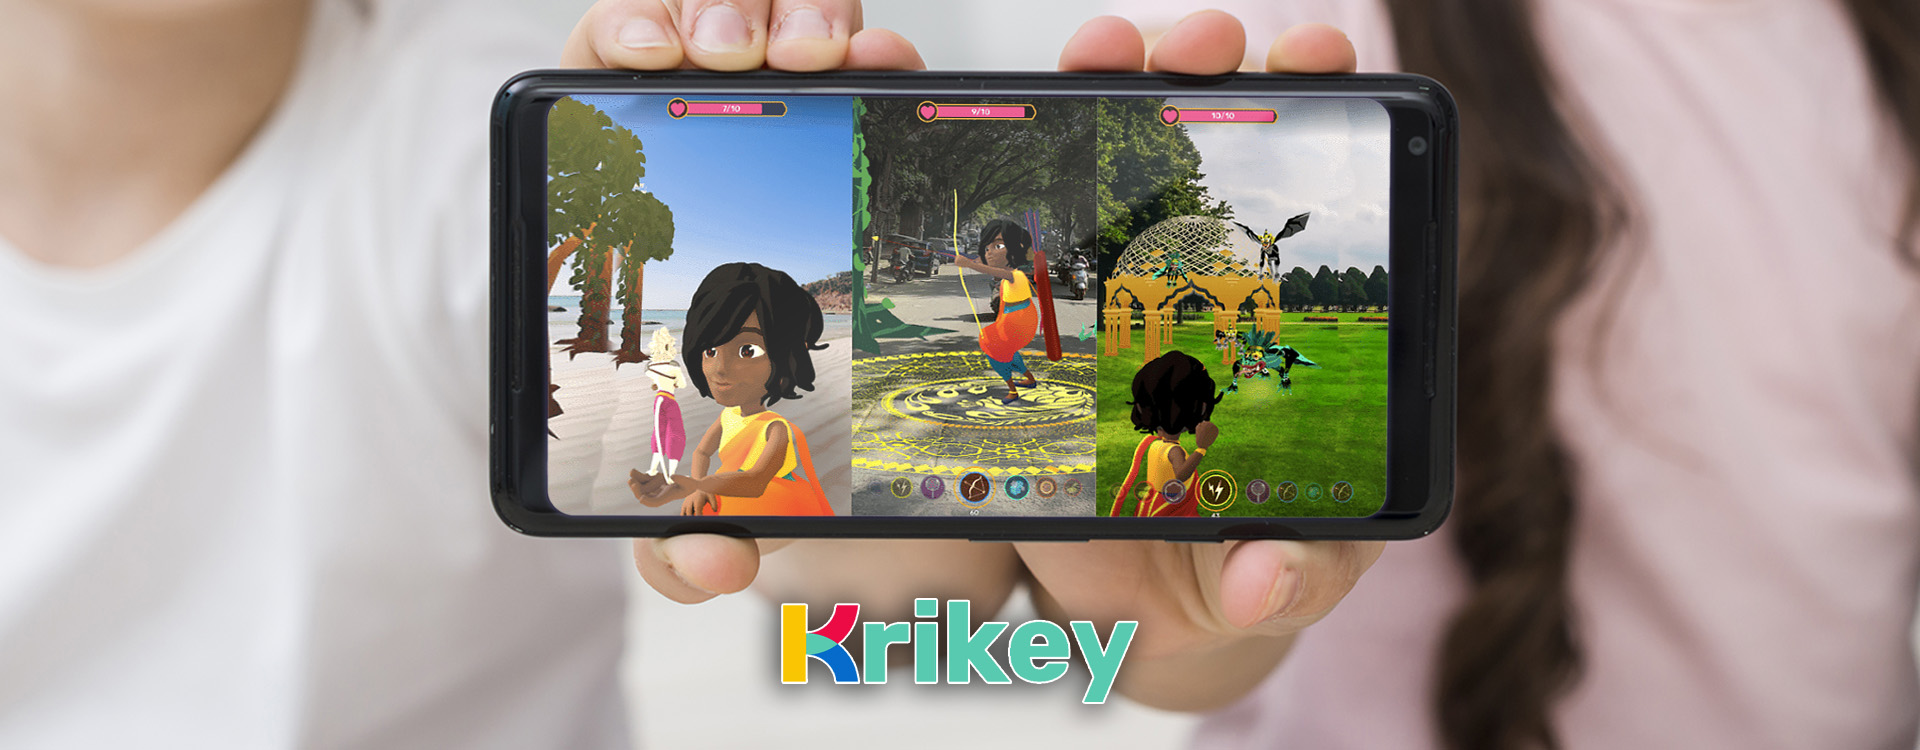 This is how Krikey is changing the face of AR gaming in India.